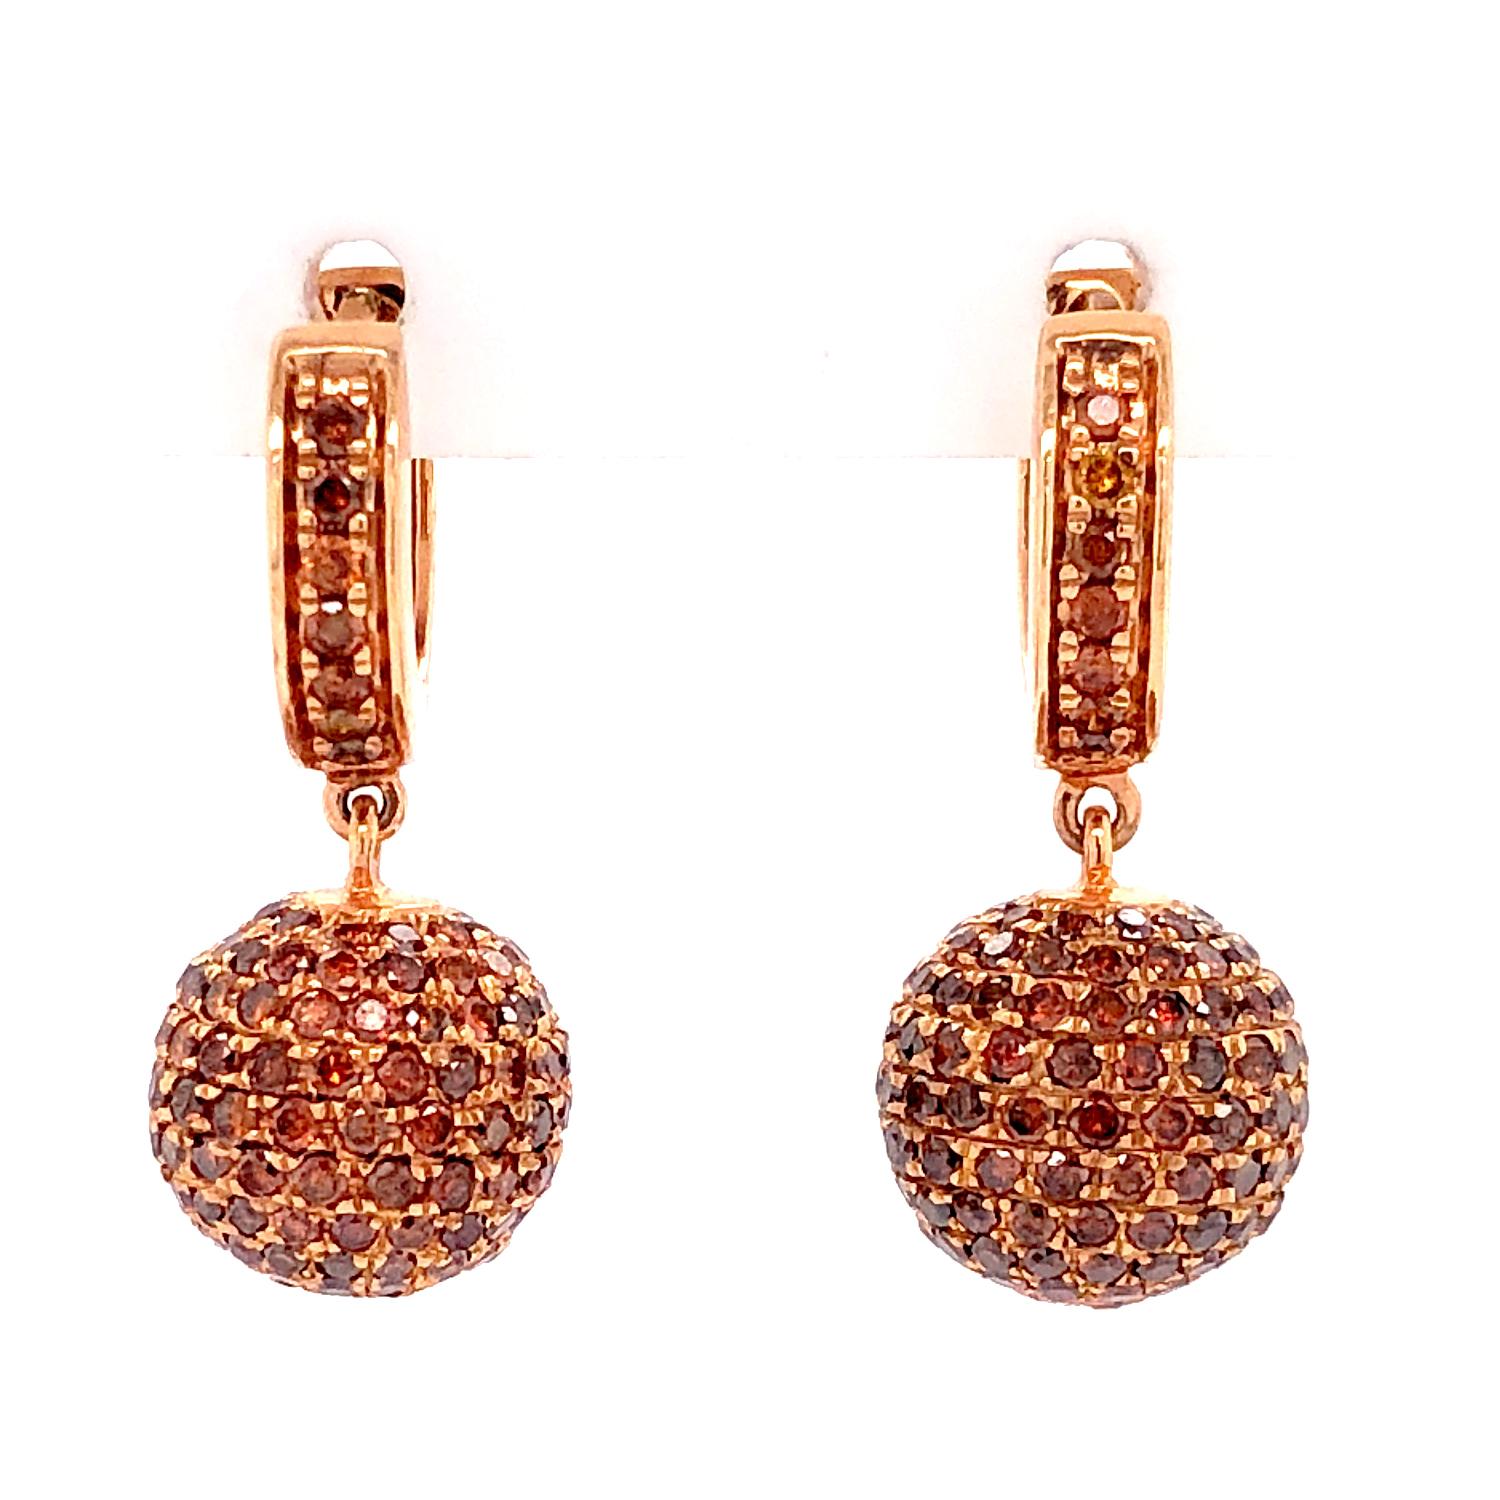 Pave Brown Diamond Ball Earrings Made in 18k Rose Gold In New Condition For Sale In New York, NY